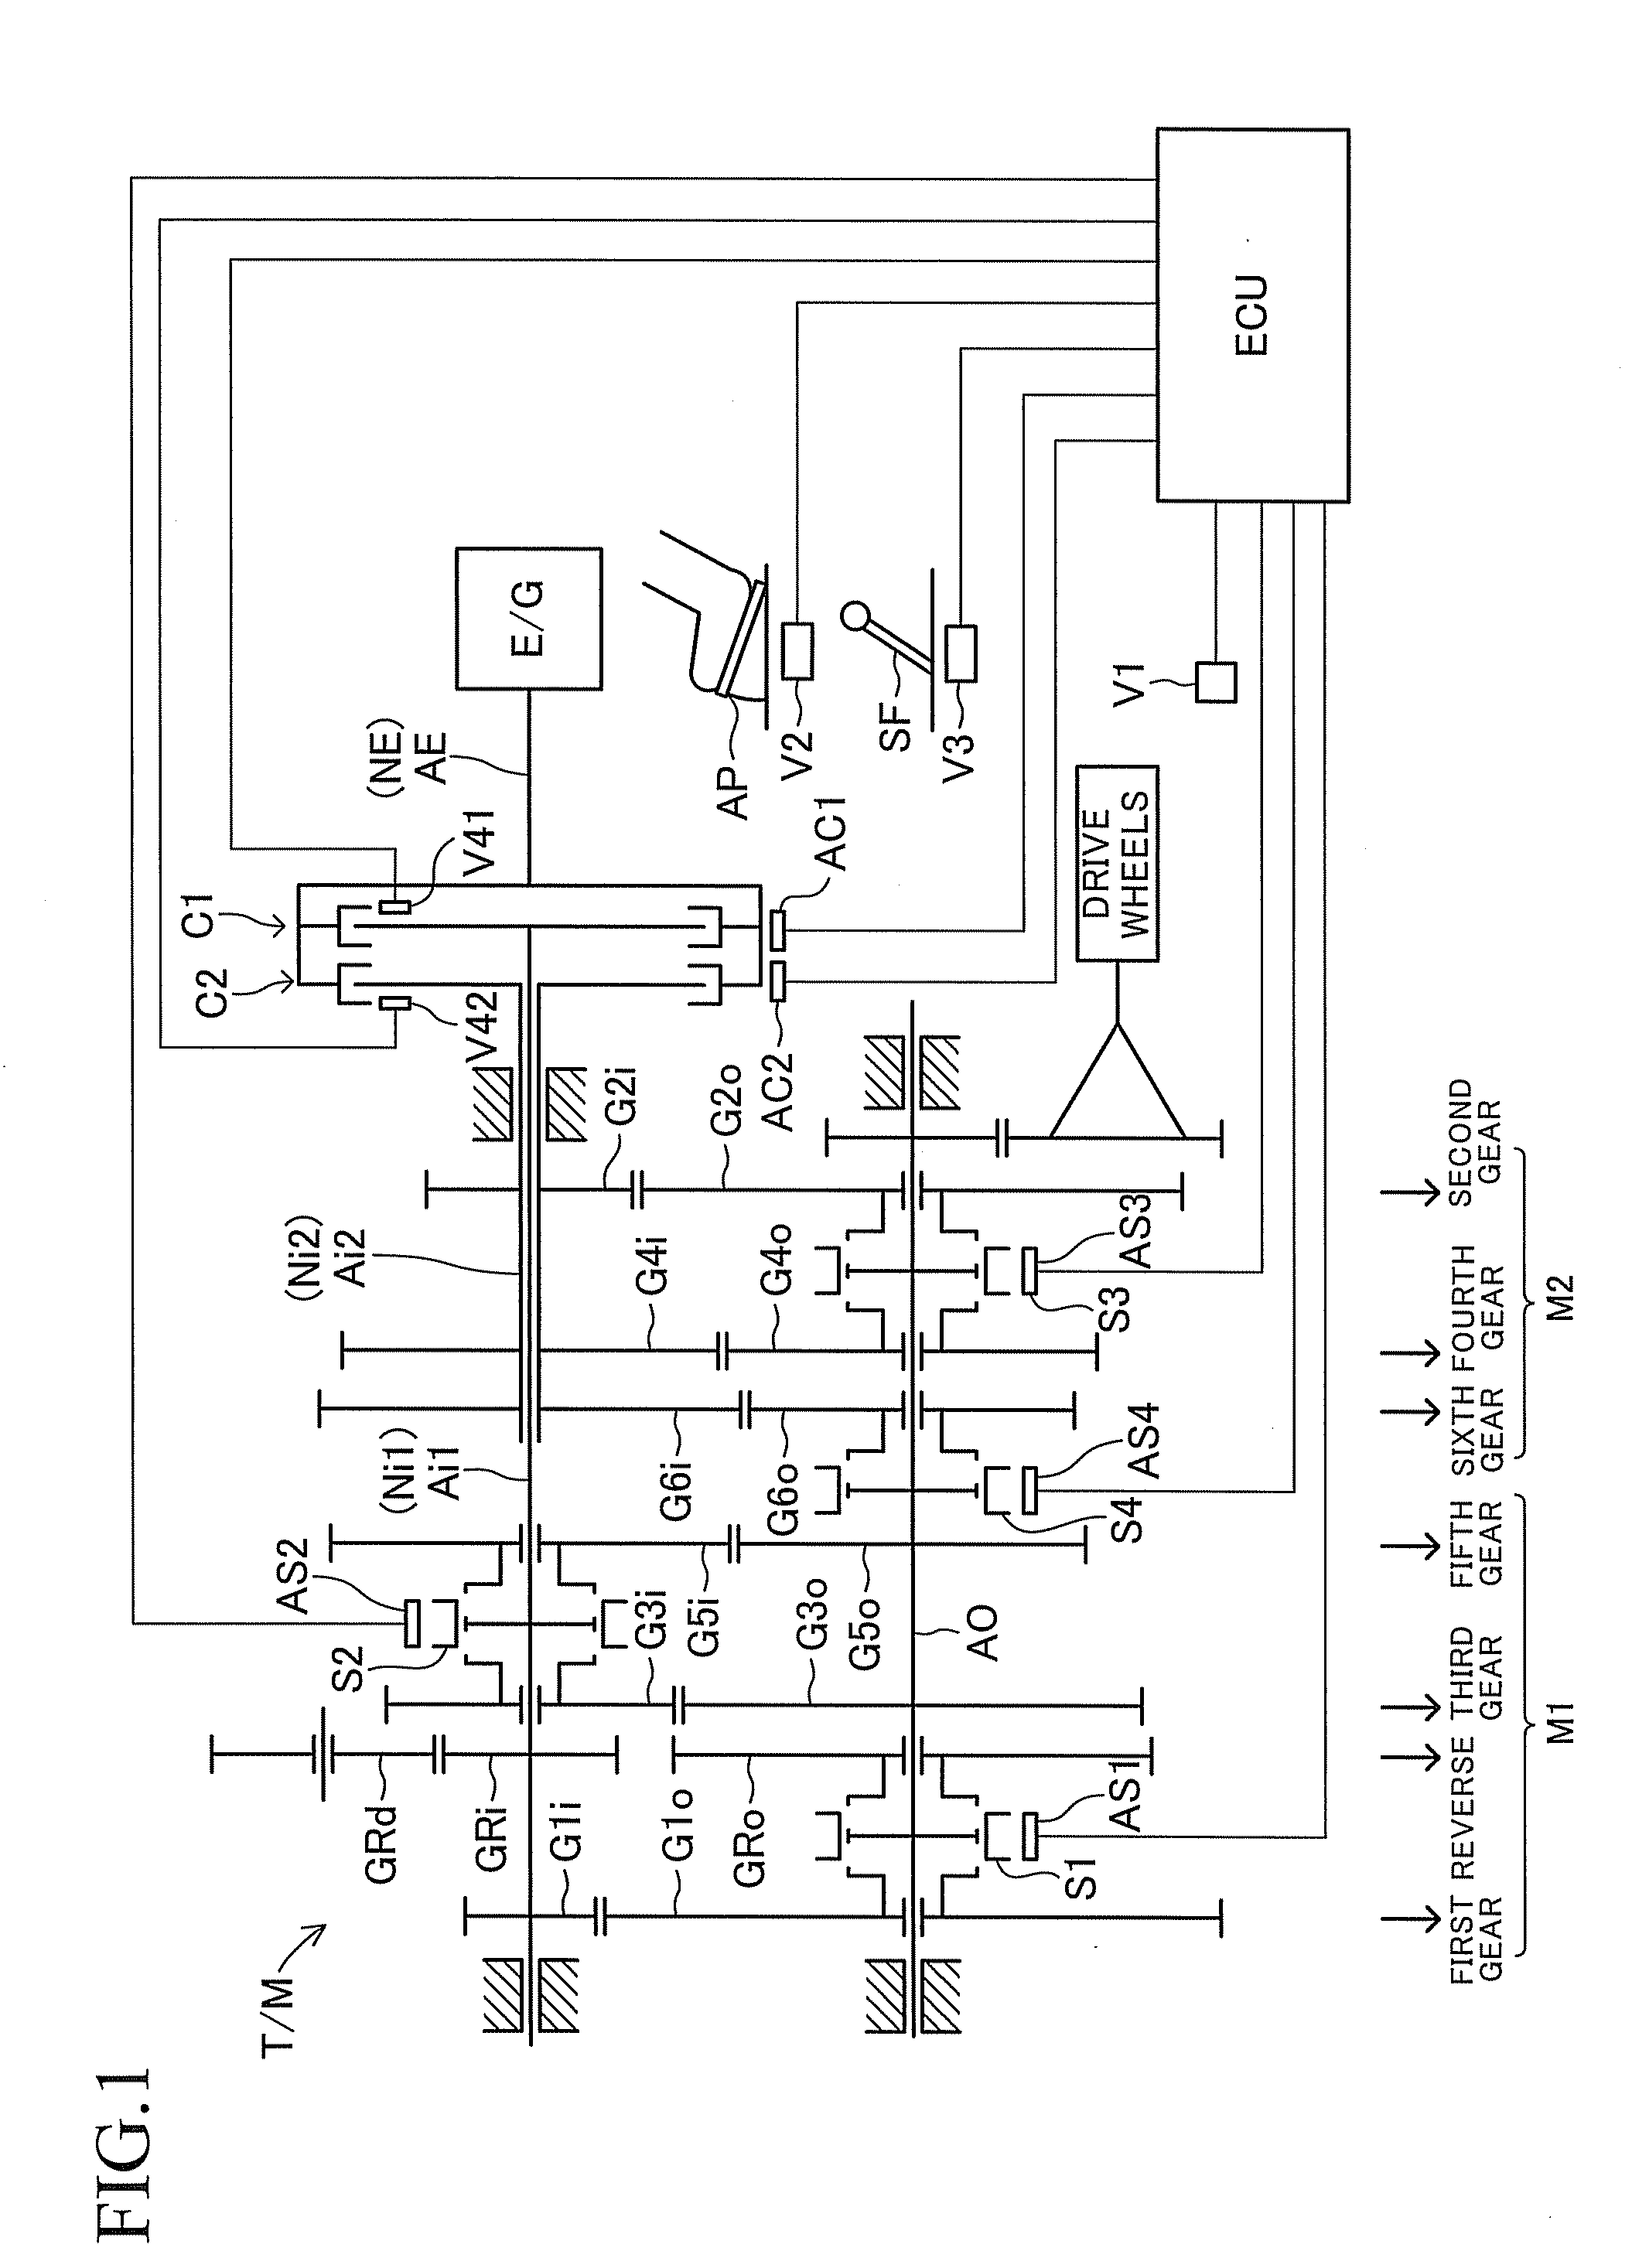 Power transmission control apparatus for vehicle